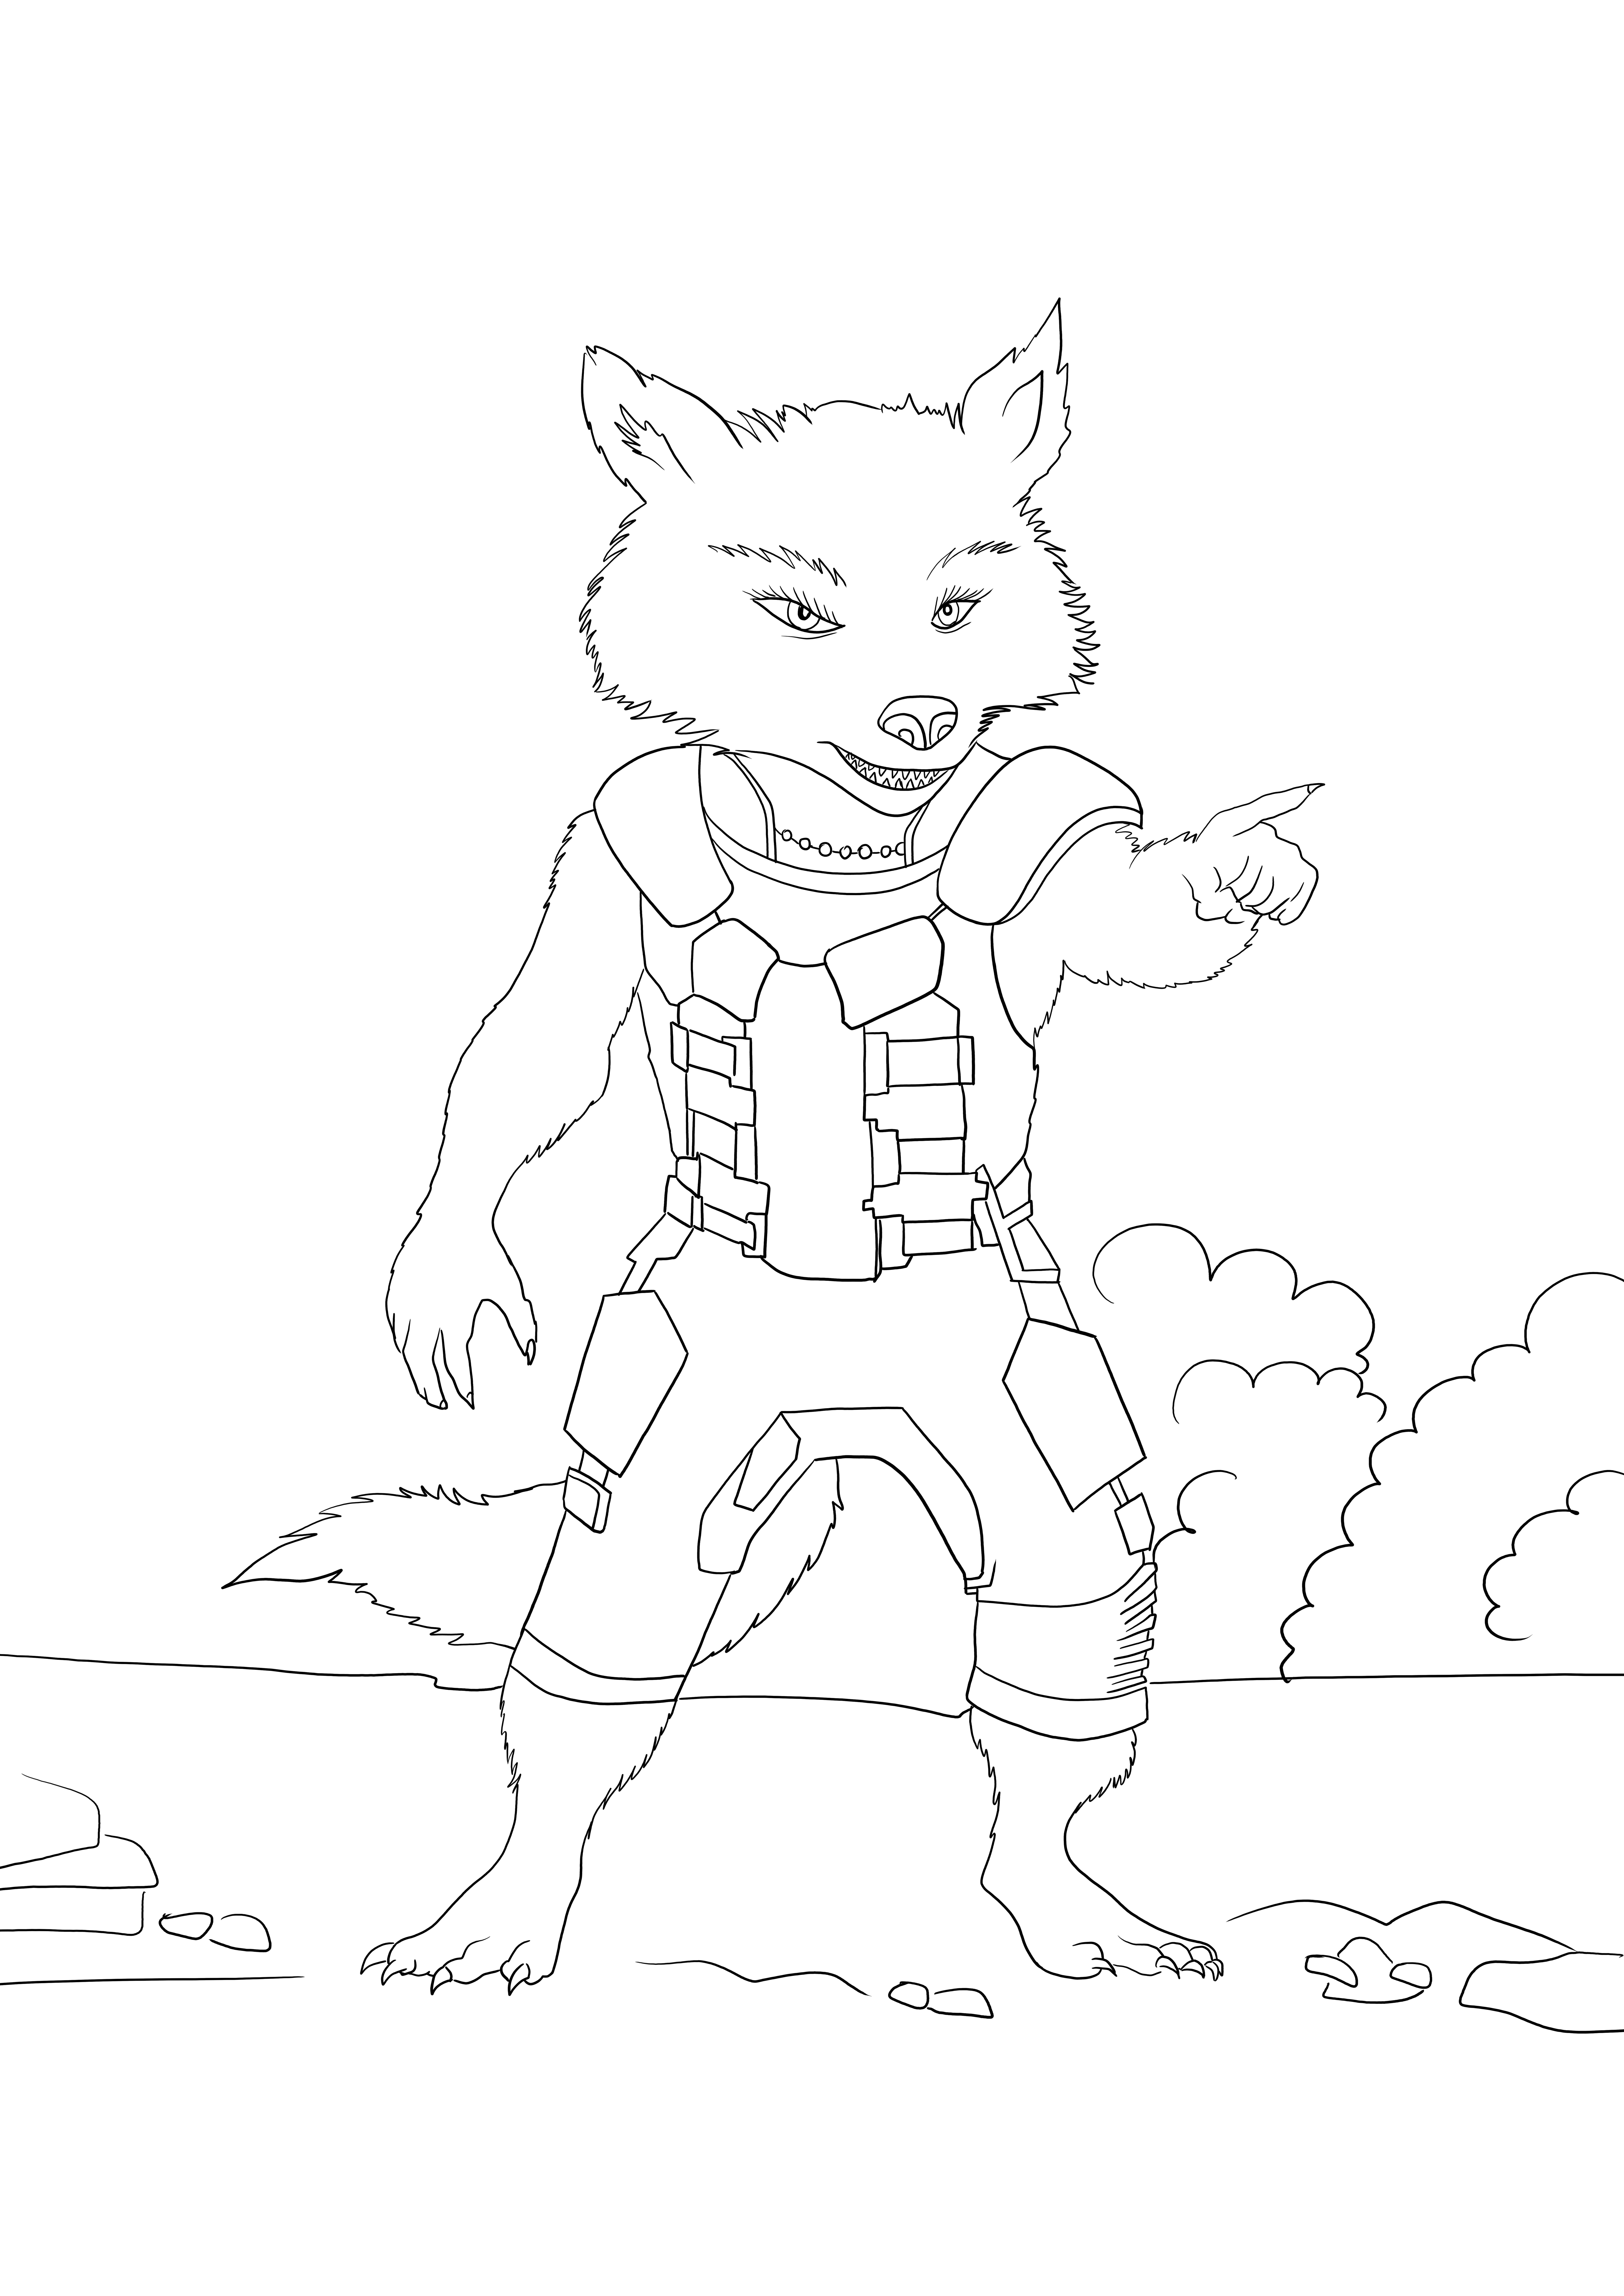 Raccoon from Guardians of the Galaxy free printable to color for kids